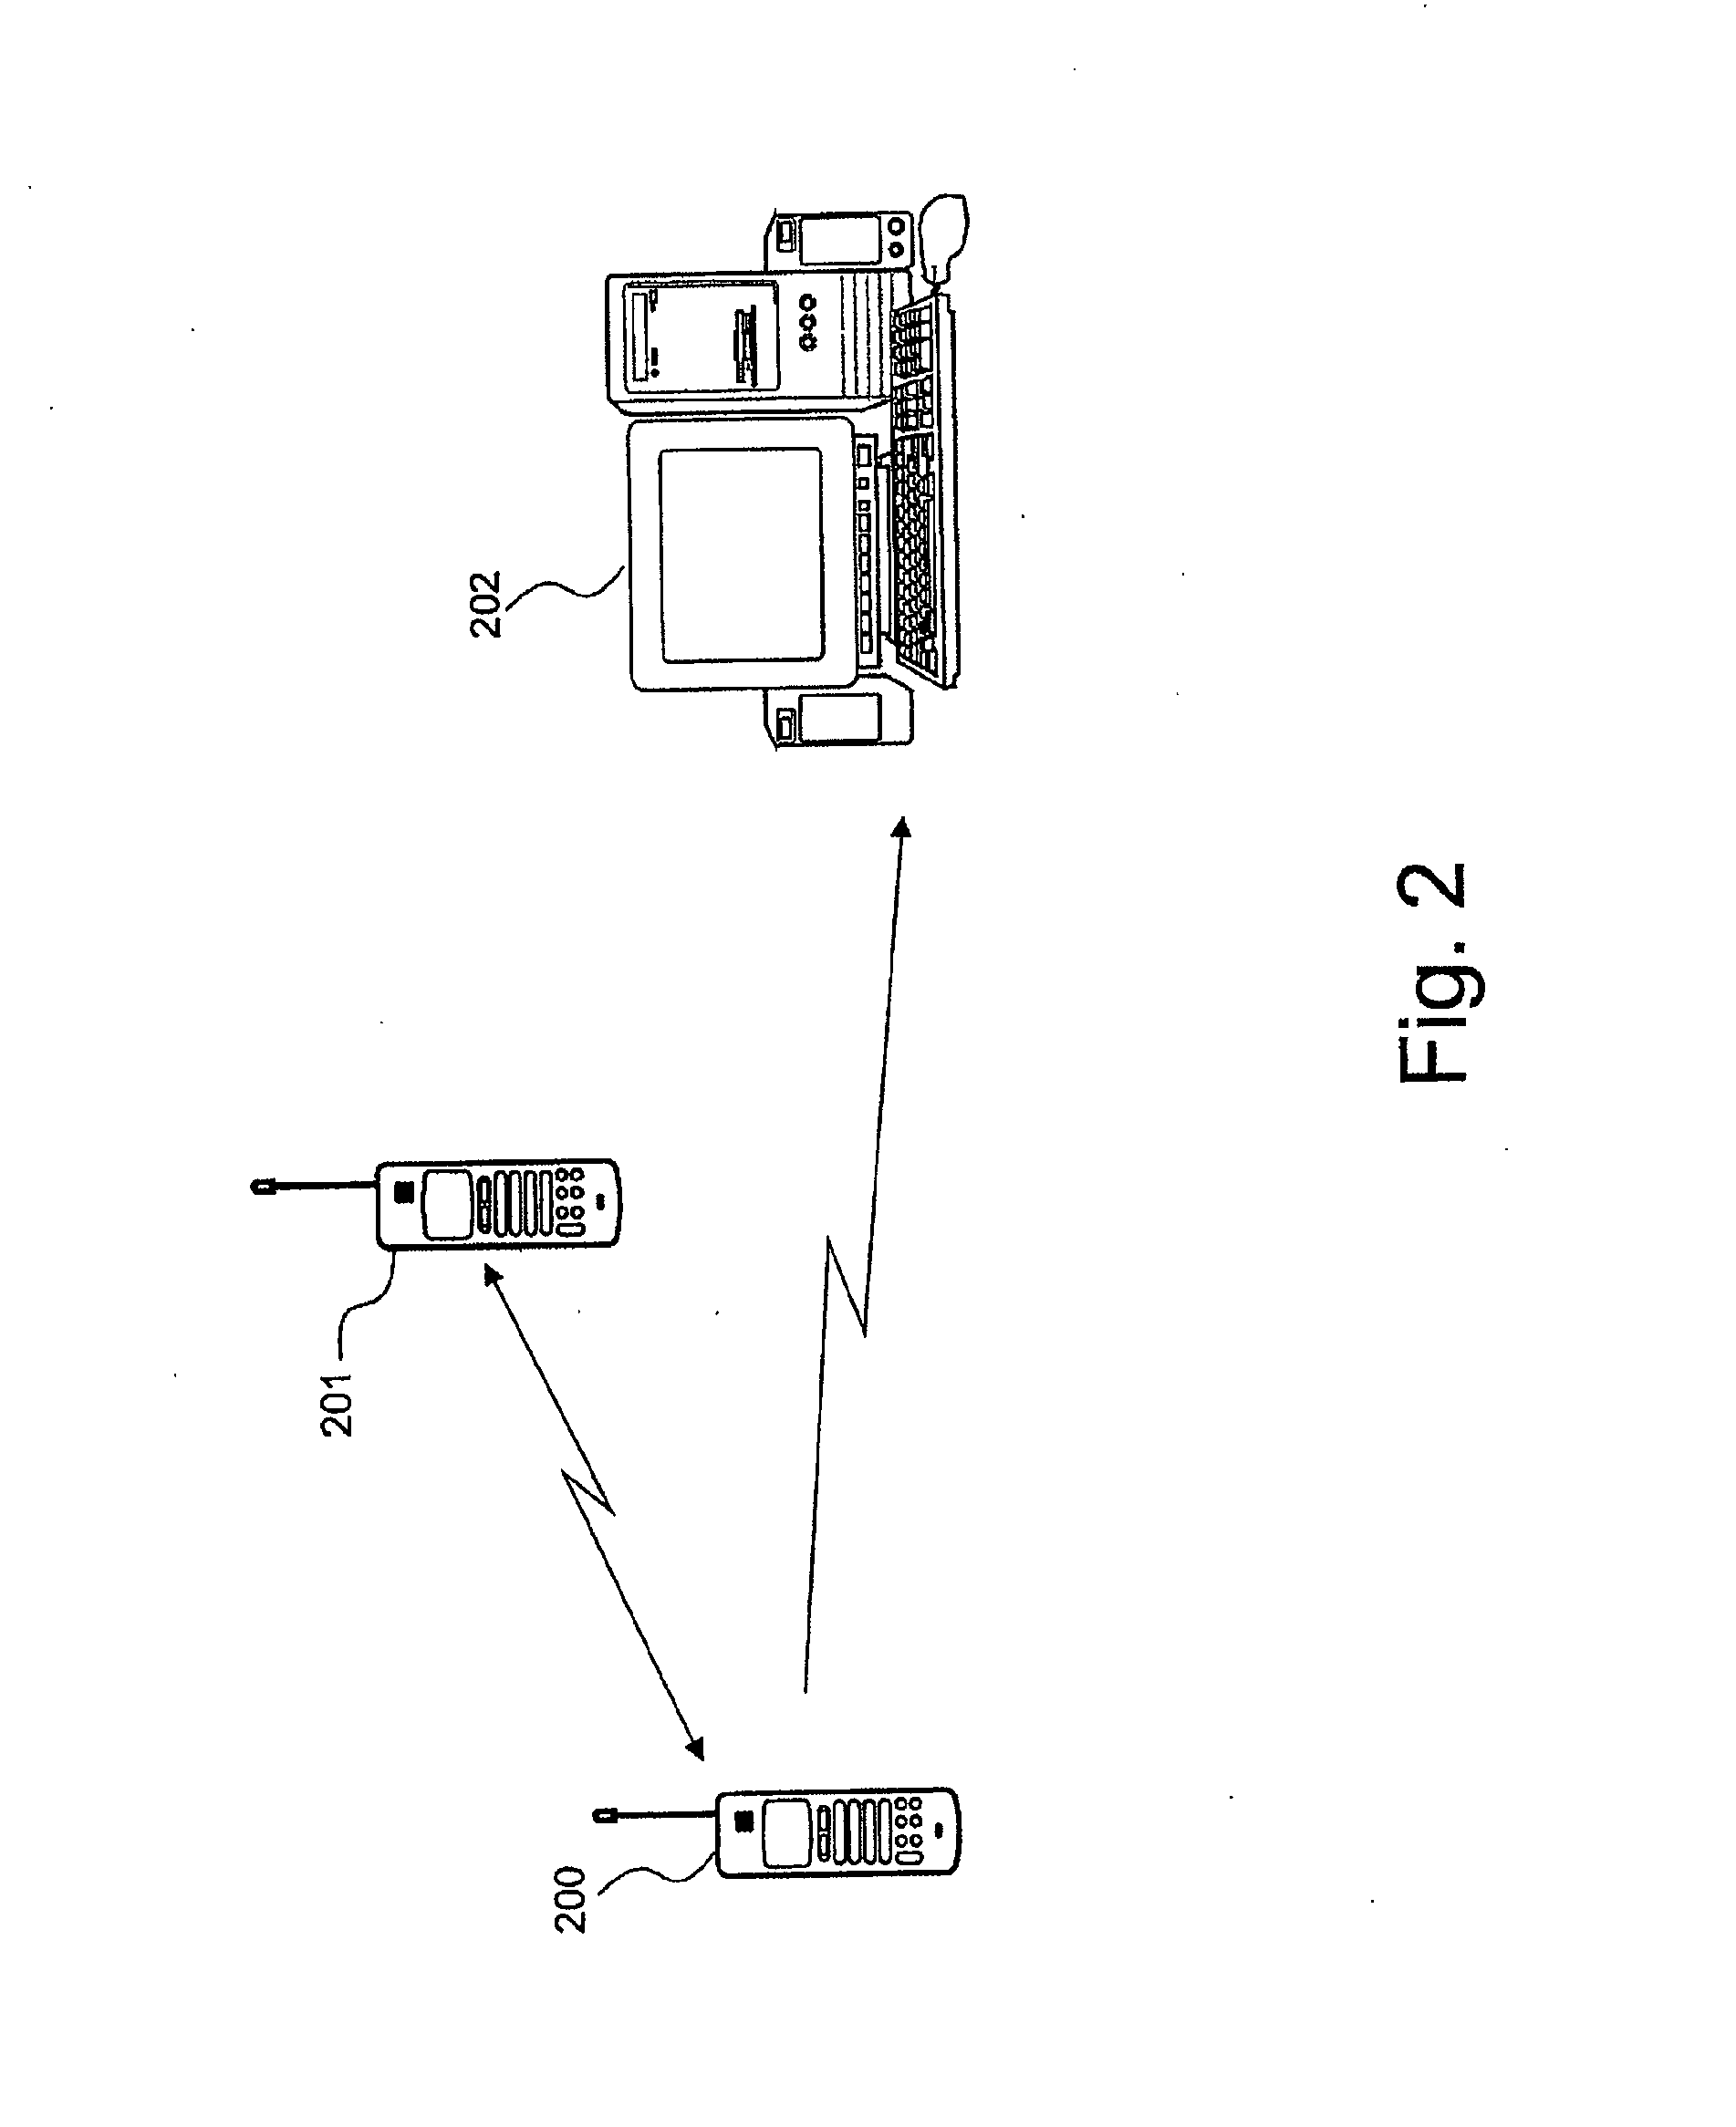 Method and apparatus for recording events